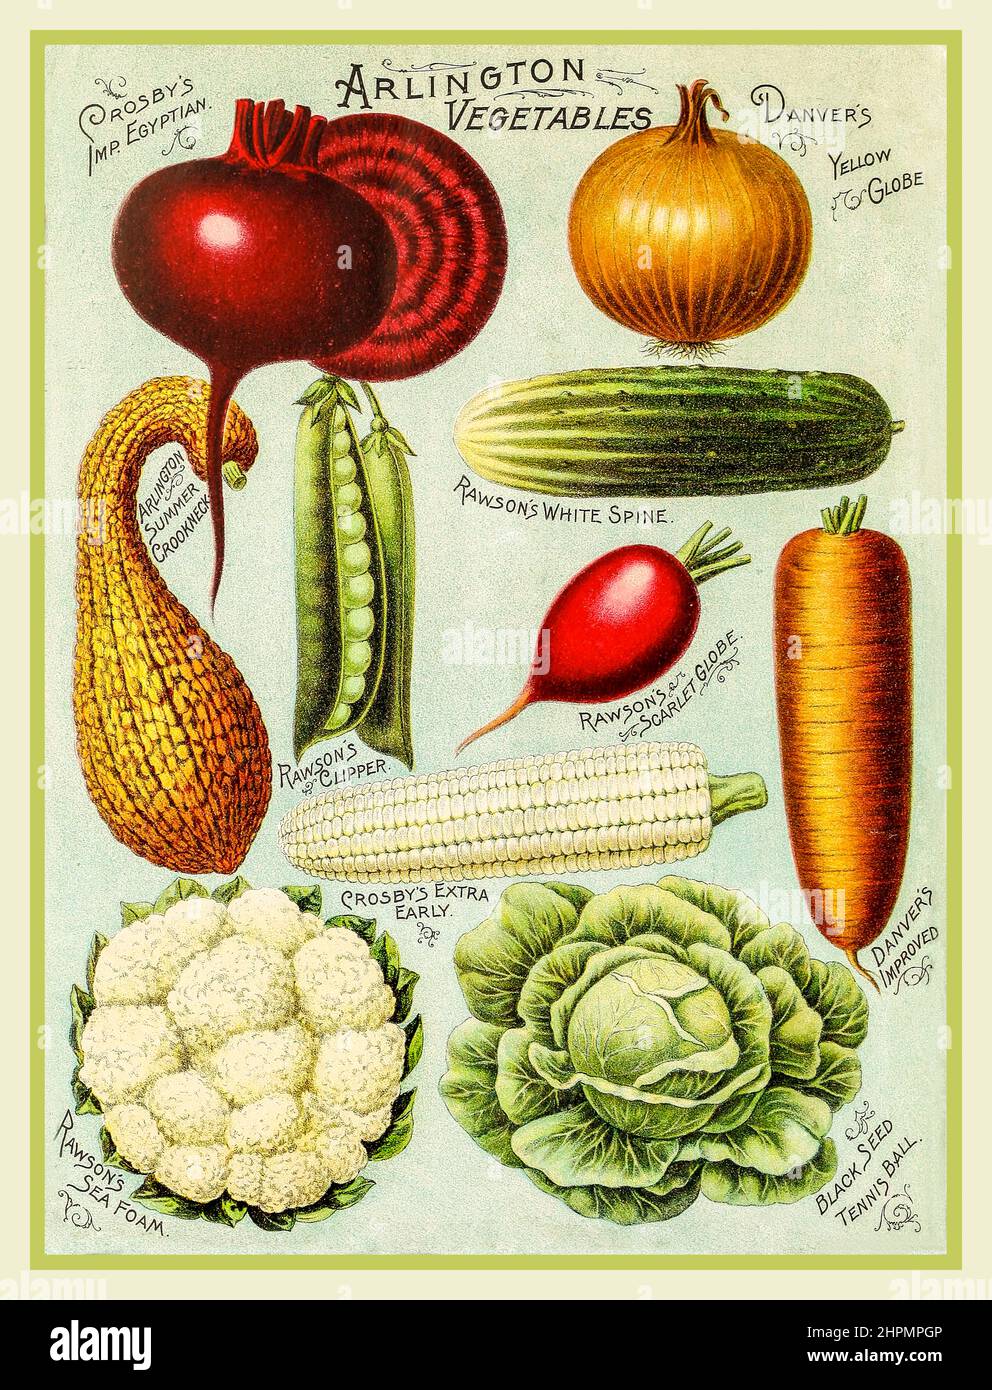 Vintage VEGETABLE Illustrated hand book - Rawson's vegetable and flower seeds - W.W. Rawson and Co. (1895) Vegetables seed catalogue cover for Arlington Vegetables, including Crosbys Imp Egytian onion, Yellow Globe, Summer Crookneck, Rawsons White Spine, Stock Photo